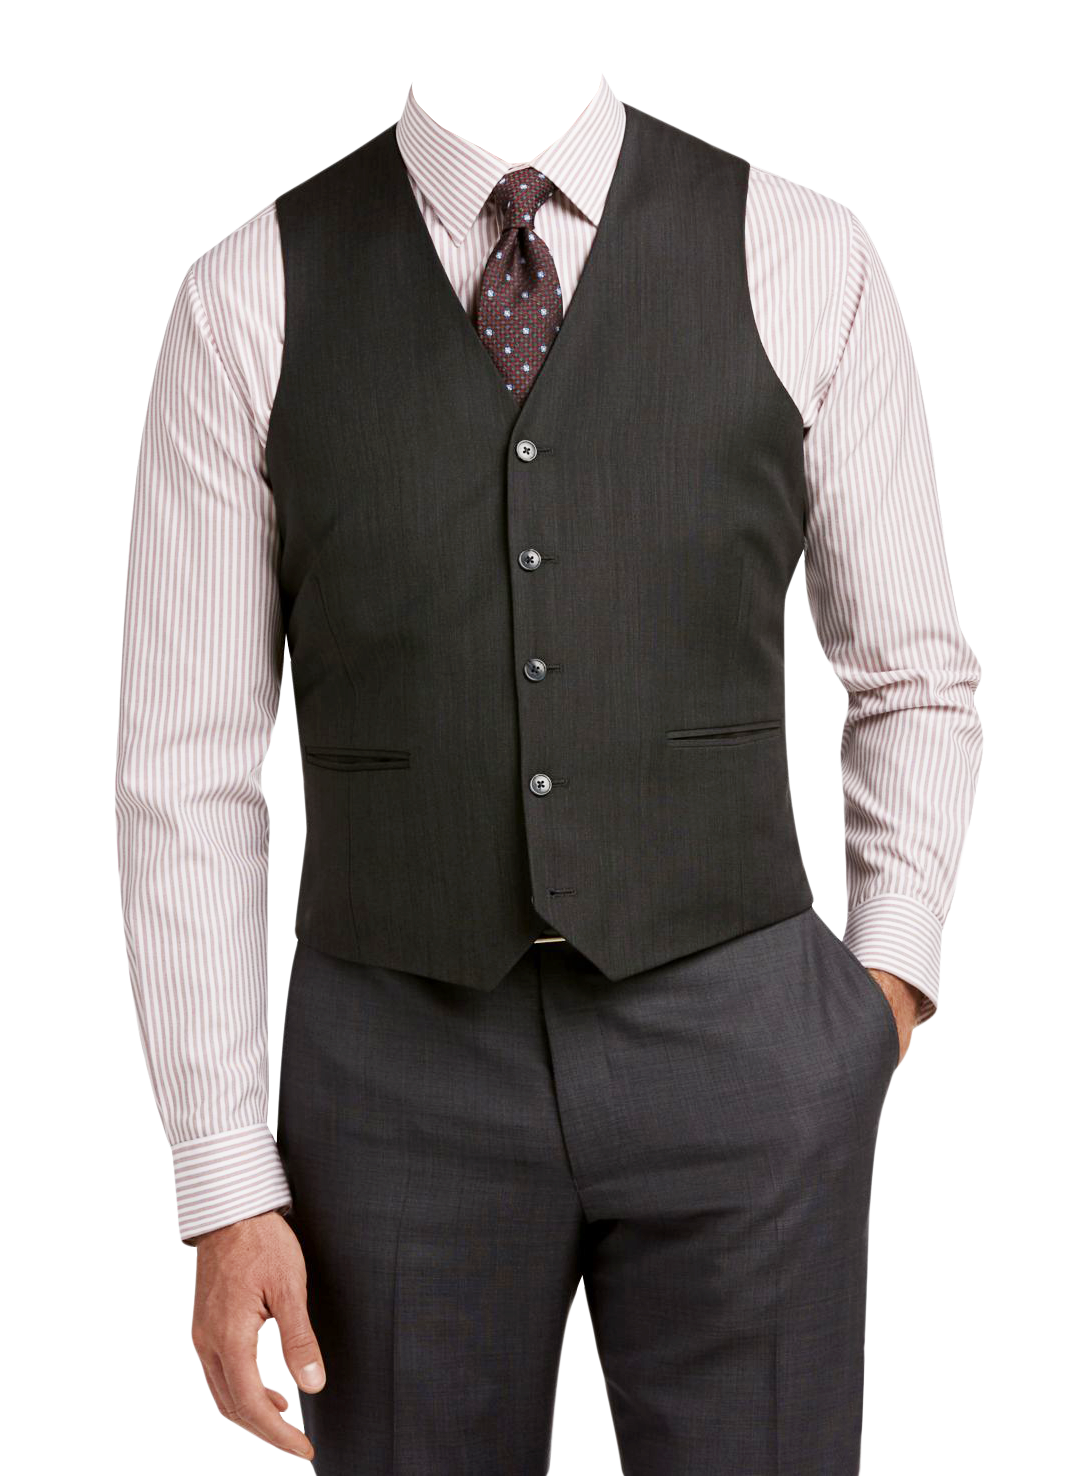 A Man In A Vest And Tie